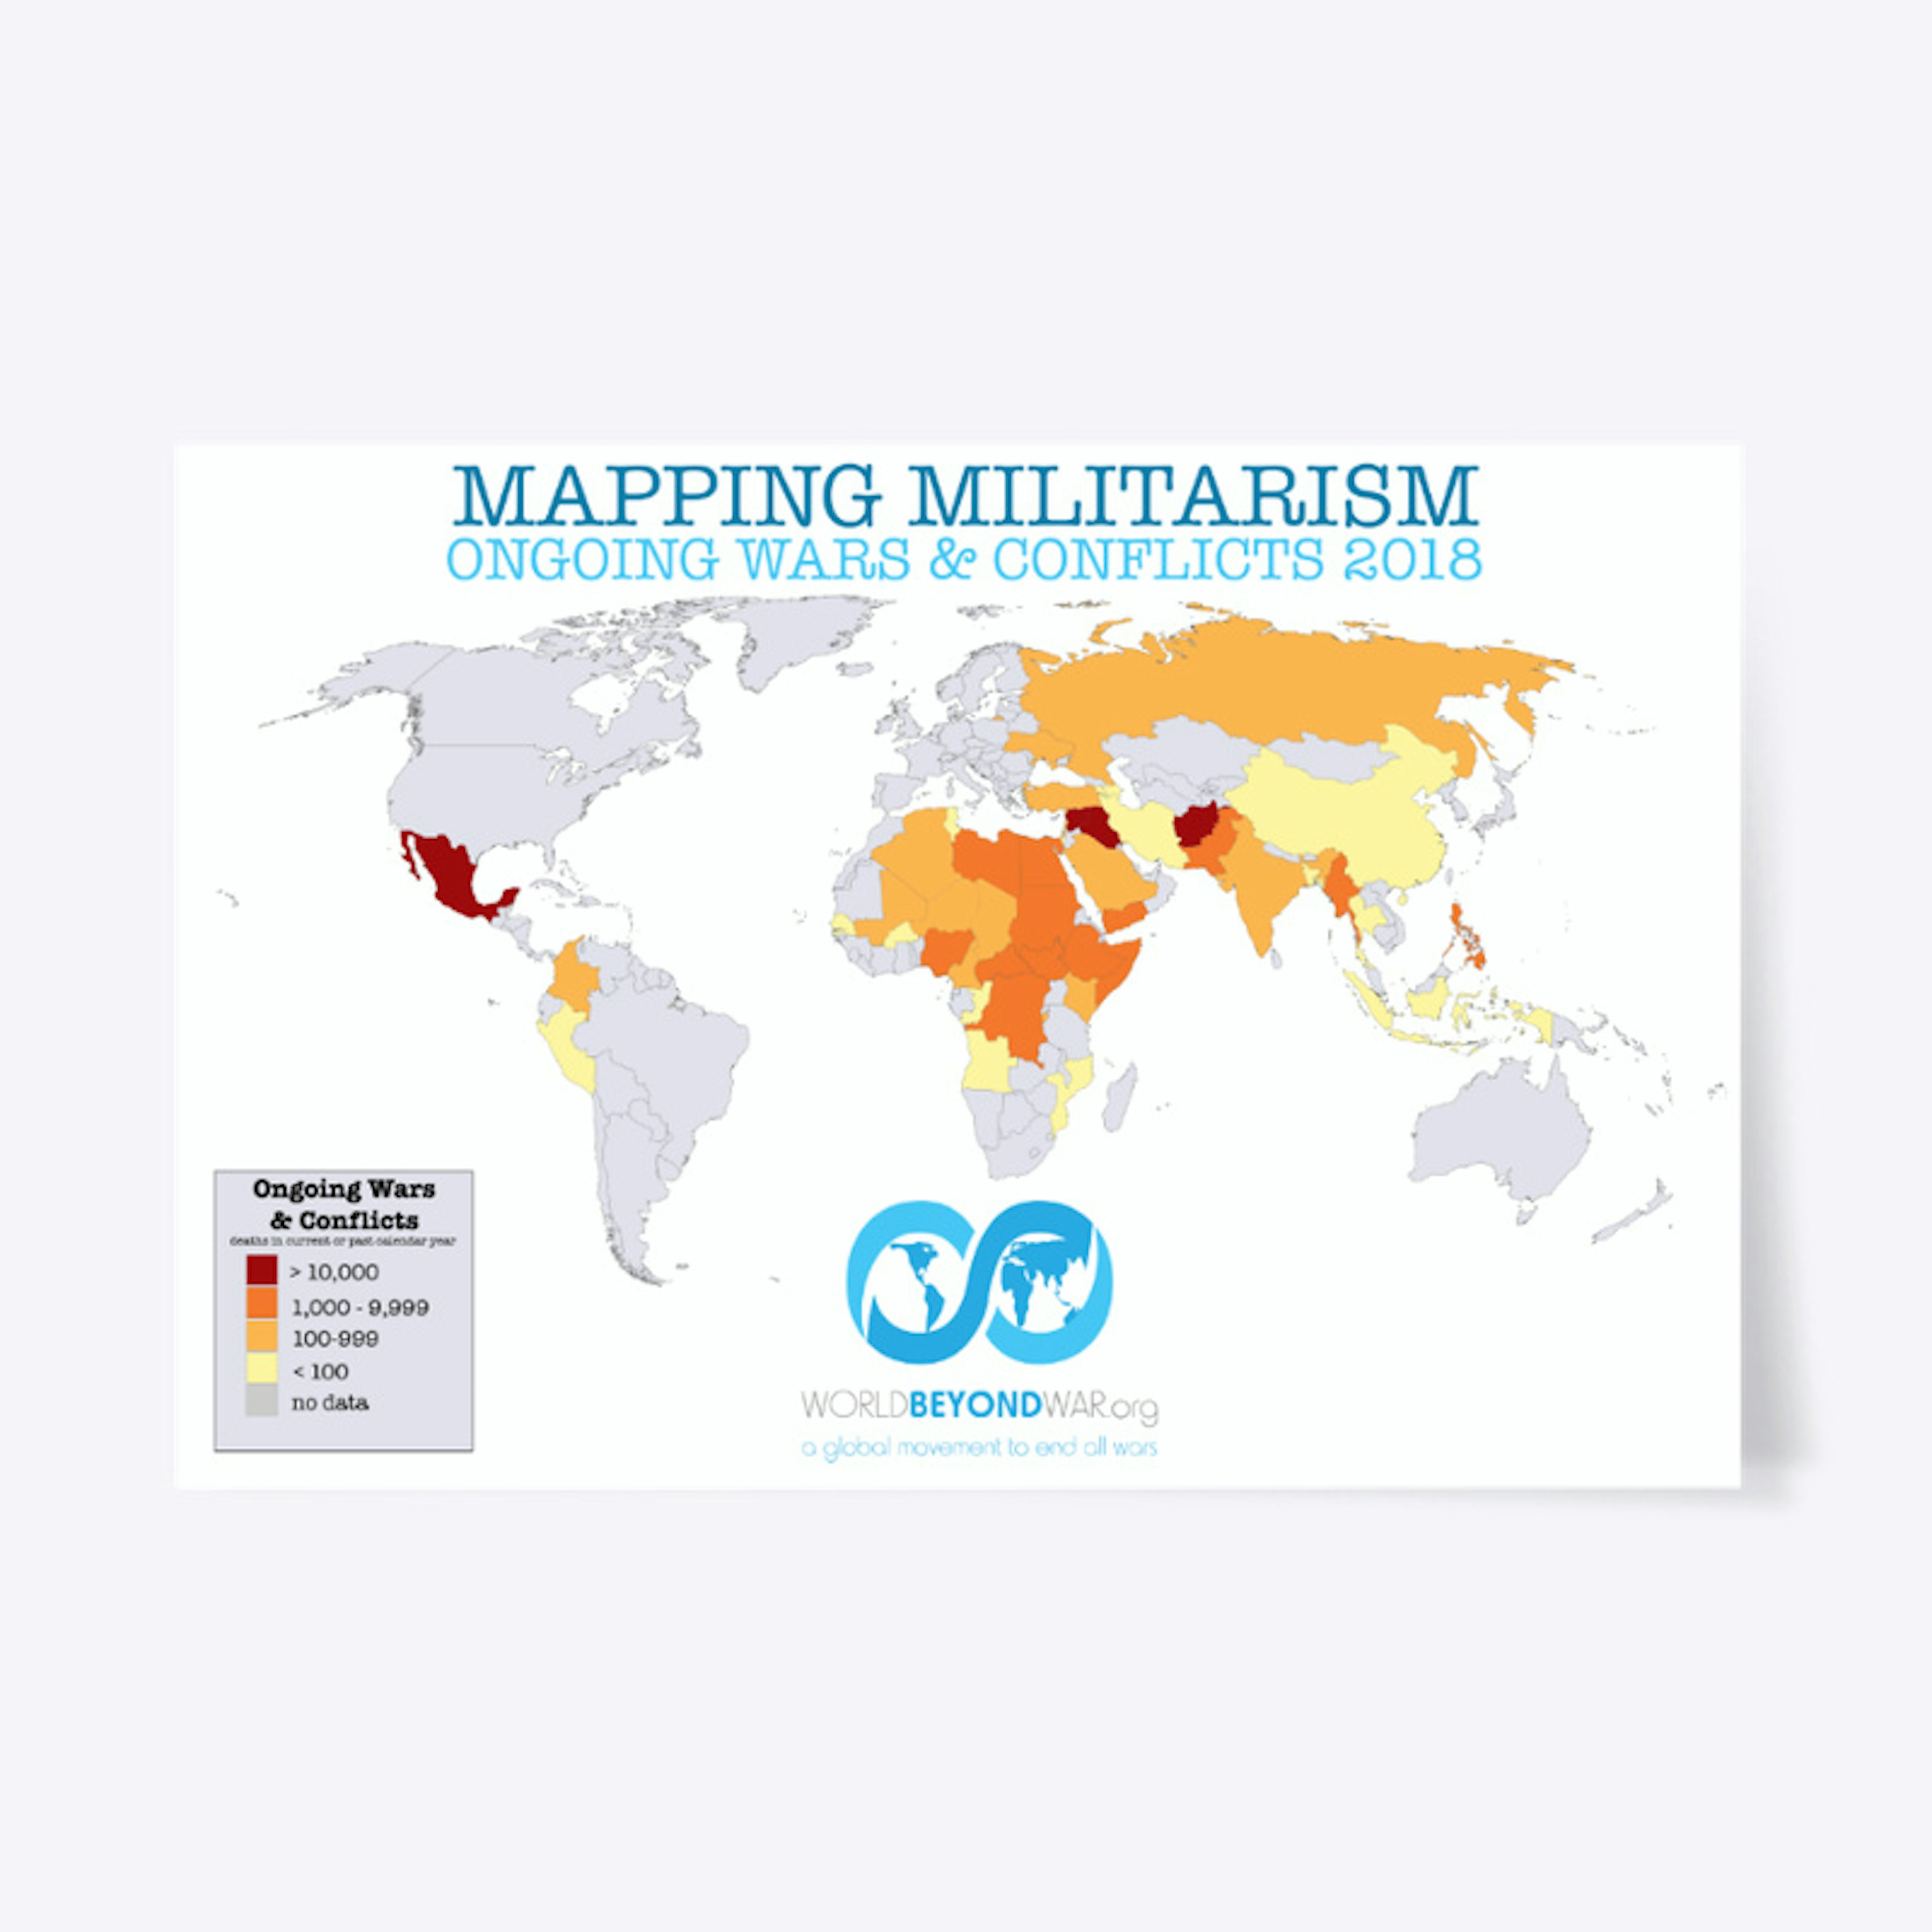 *Mapping Militarism: Ongoing Conflicts